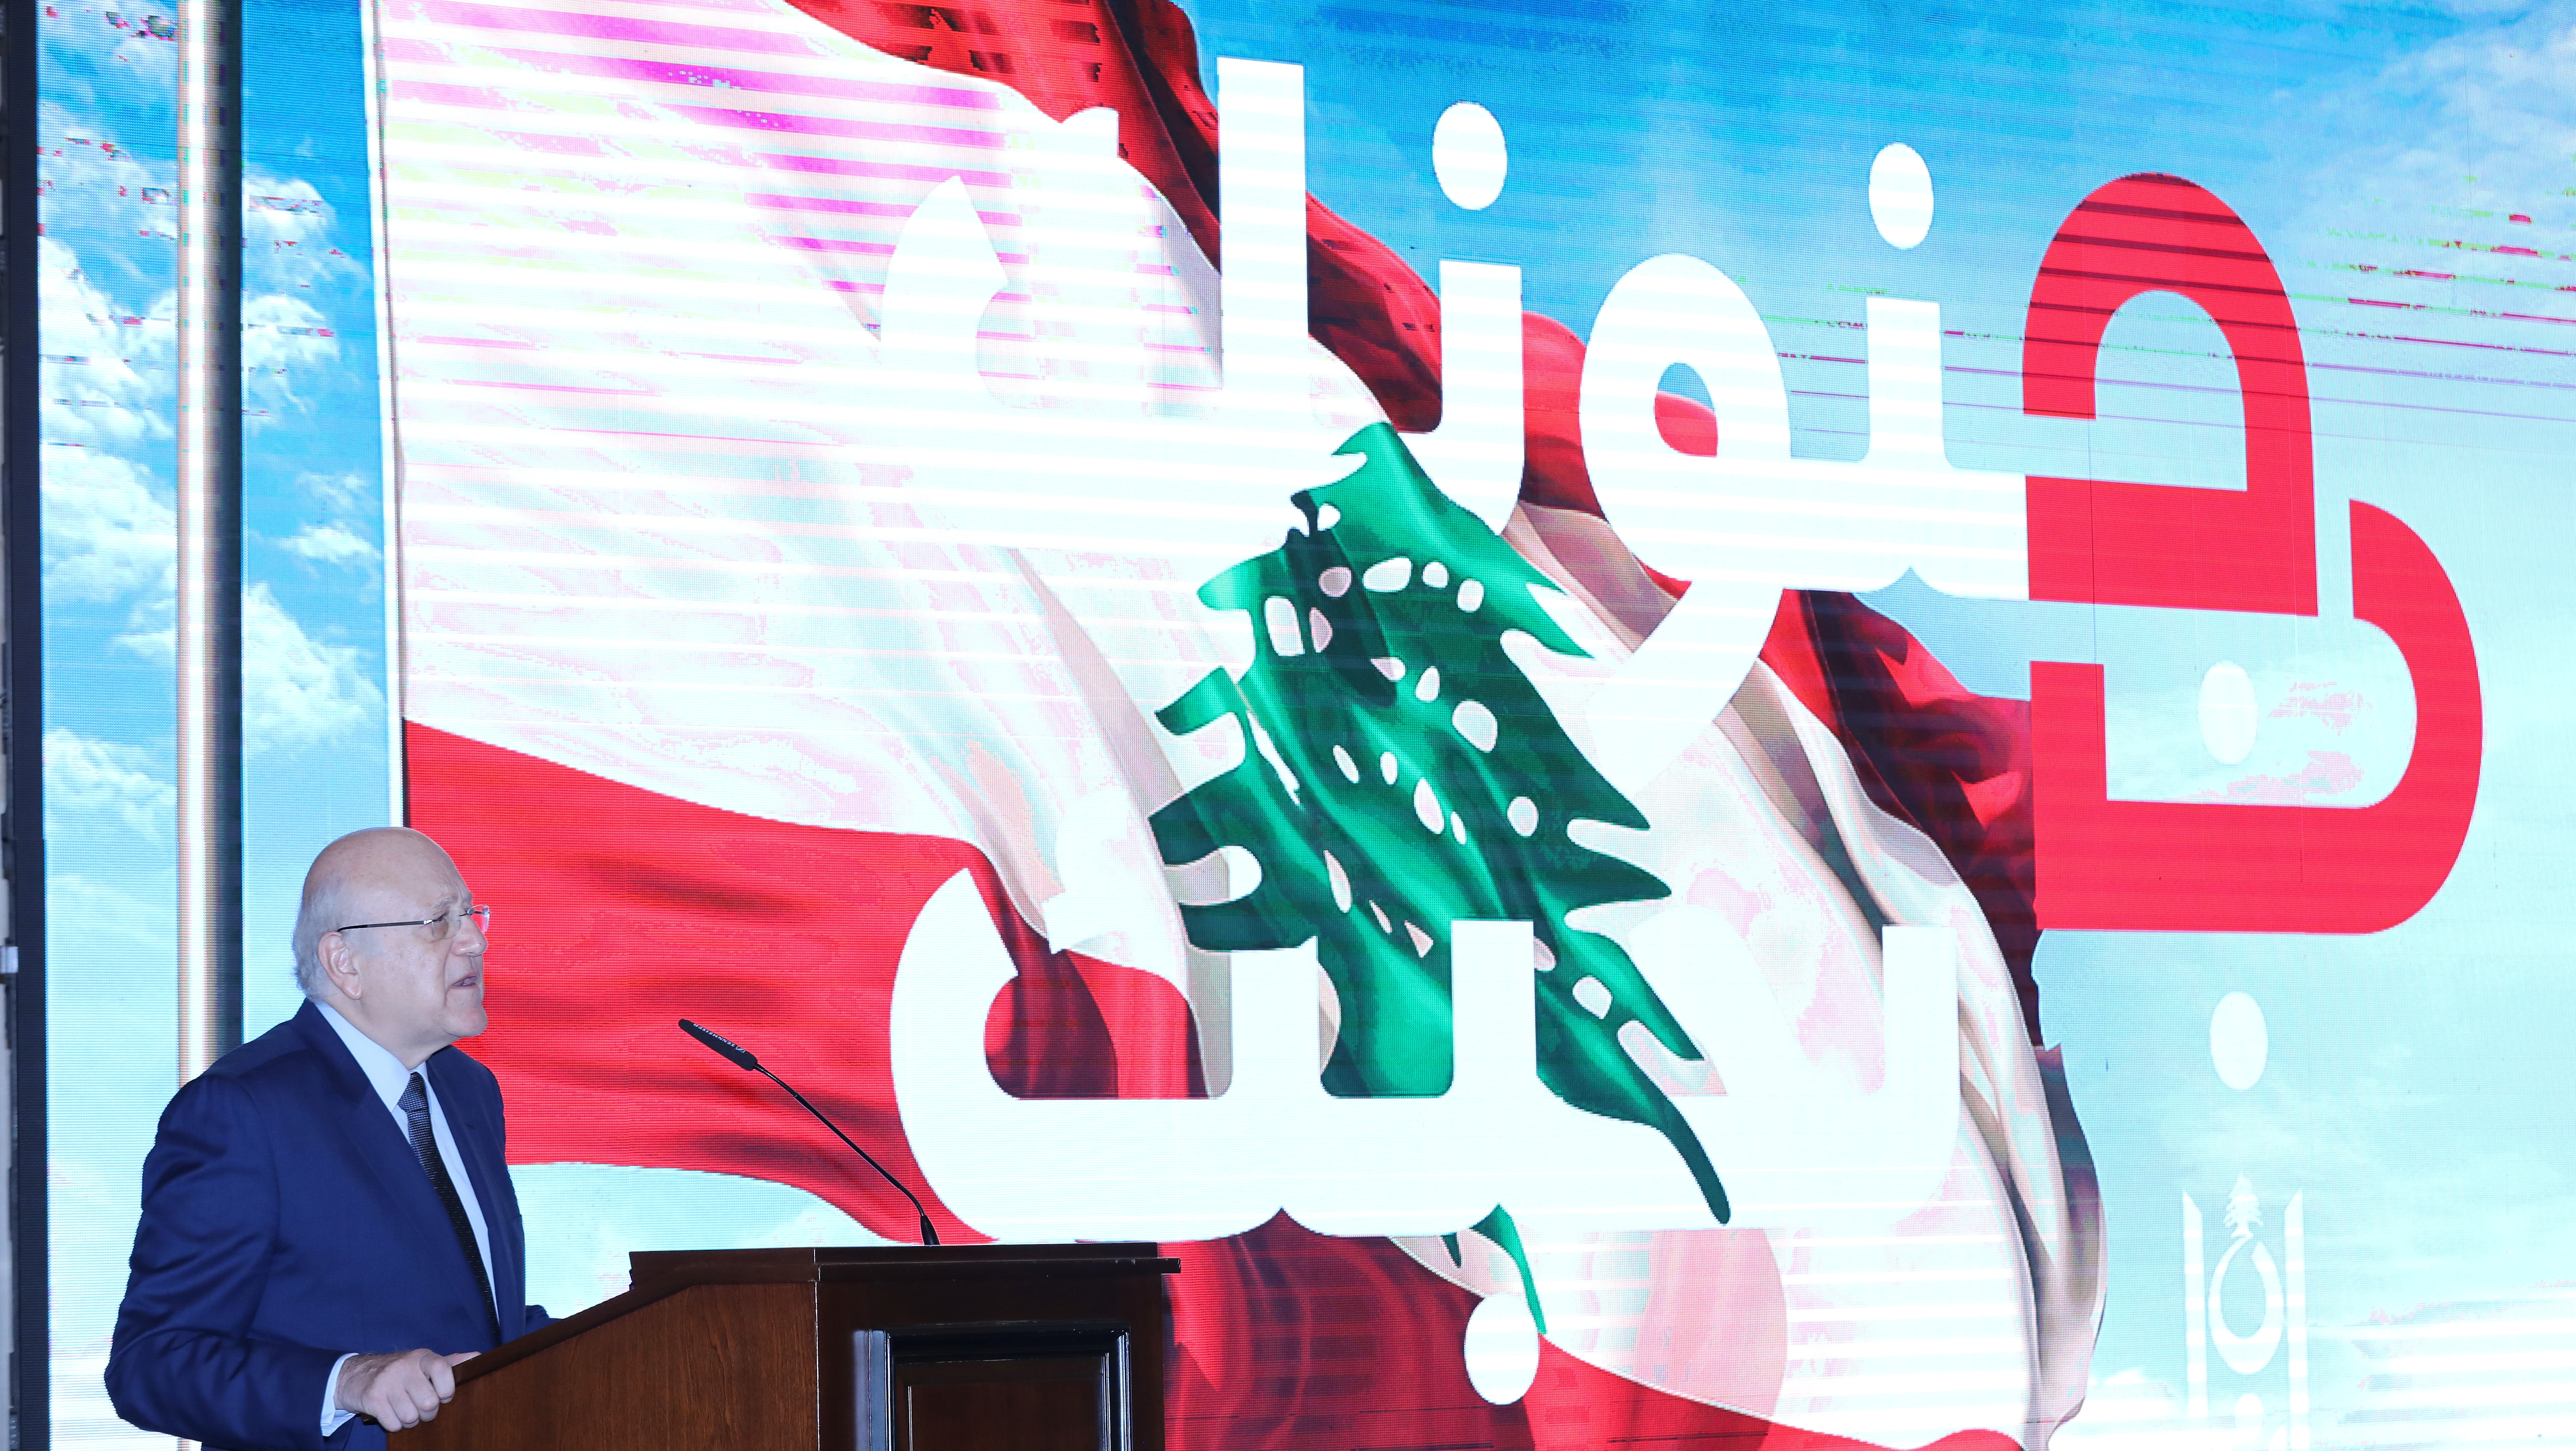 Lebanese Prime Minister Najib Mikati speaks as he stands near a slogan that reads 'We love you in your madness' displayed on a screen at the government palace in Beirut